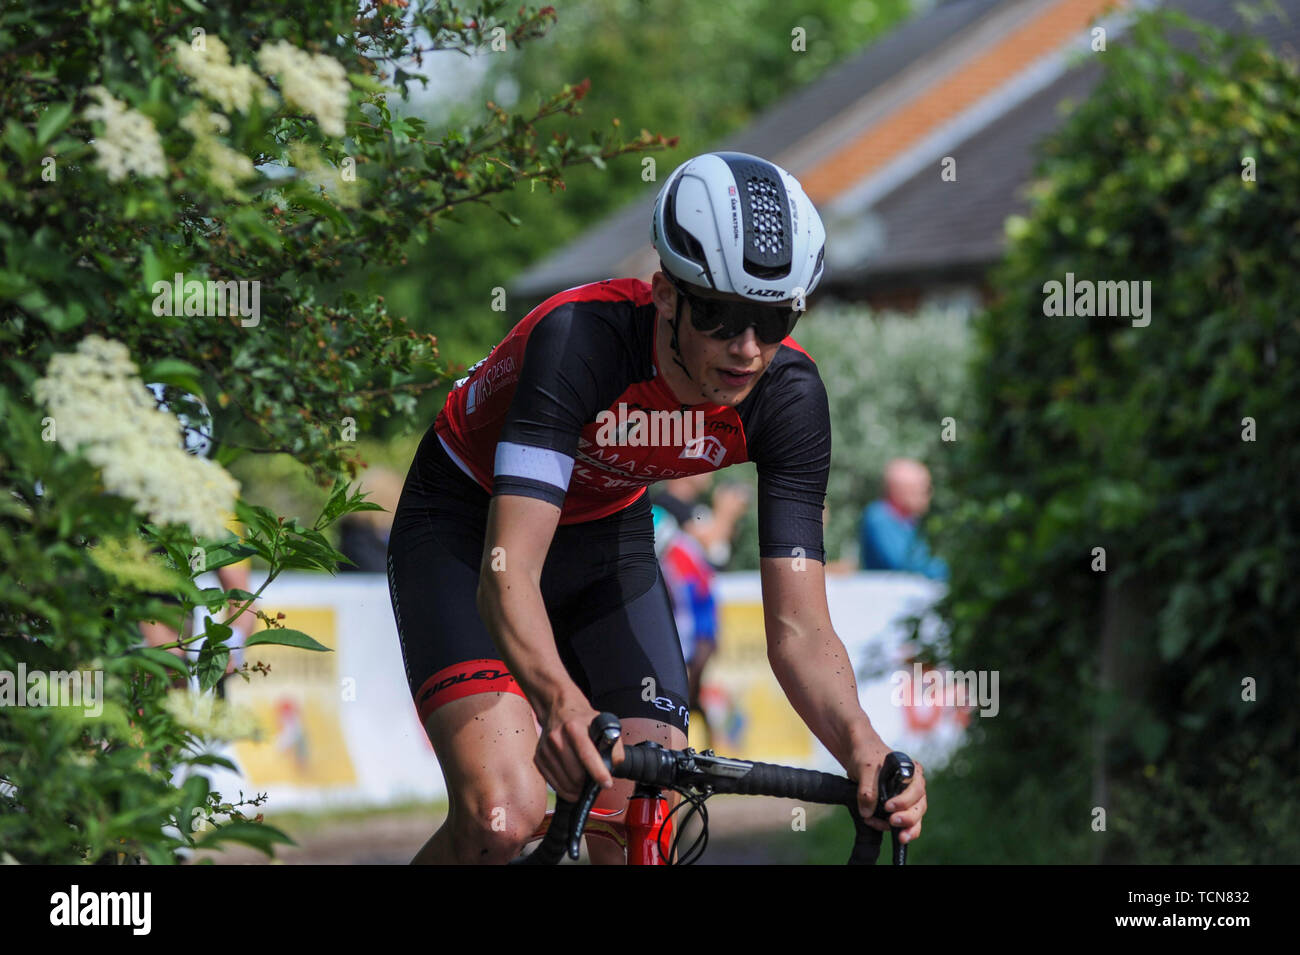 Melton Mowbray, Leicestershire, UK,  9th June 2019. Samuel Watson, Fensham Howes - MAS Design in action from the 2019 6th Junior CiCLE Classic Cycle Race in Melton Mowbray part of the British Cycling National Junior Road Race Series. @ Credit: David Partridge/Alamy Live News Stock Photo